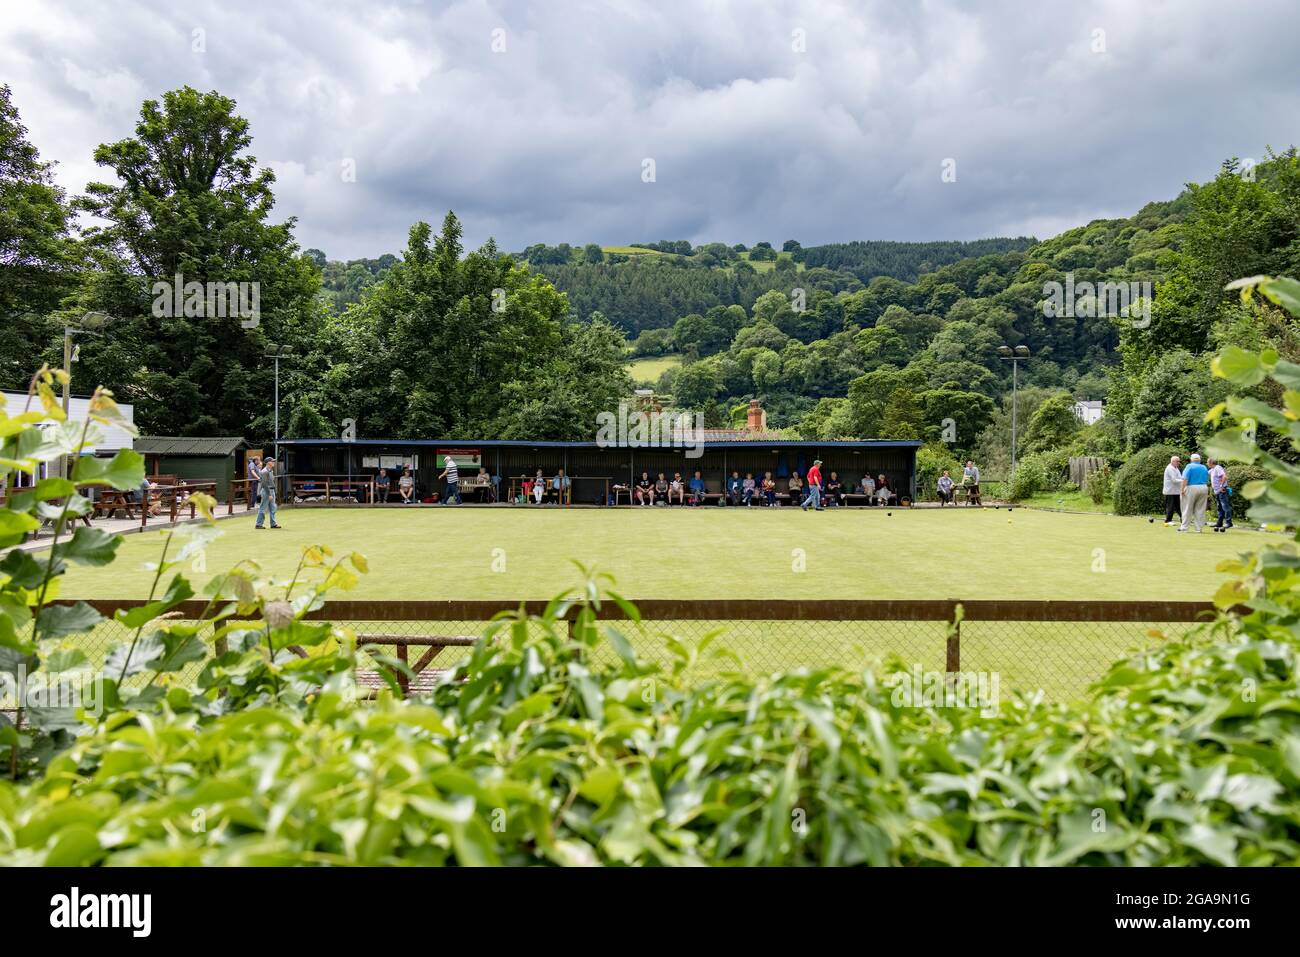 LLANGOLLEN, DENBIGHSHIRE, WALES - JULY 11 : People at the bowls club in Llangollen, Wales on July 11, 2021. Unidentified people Stock Photo